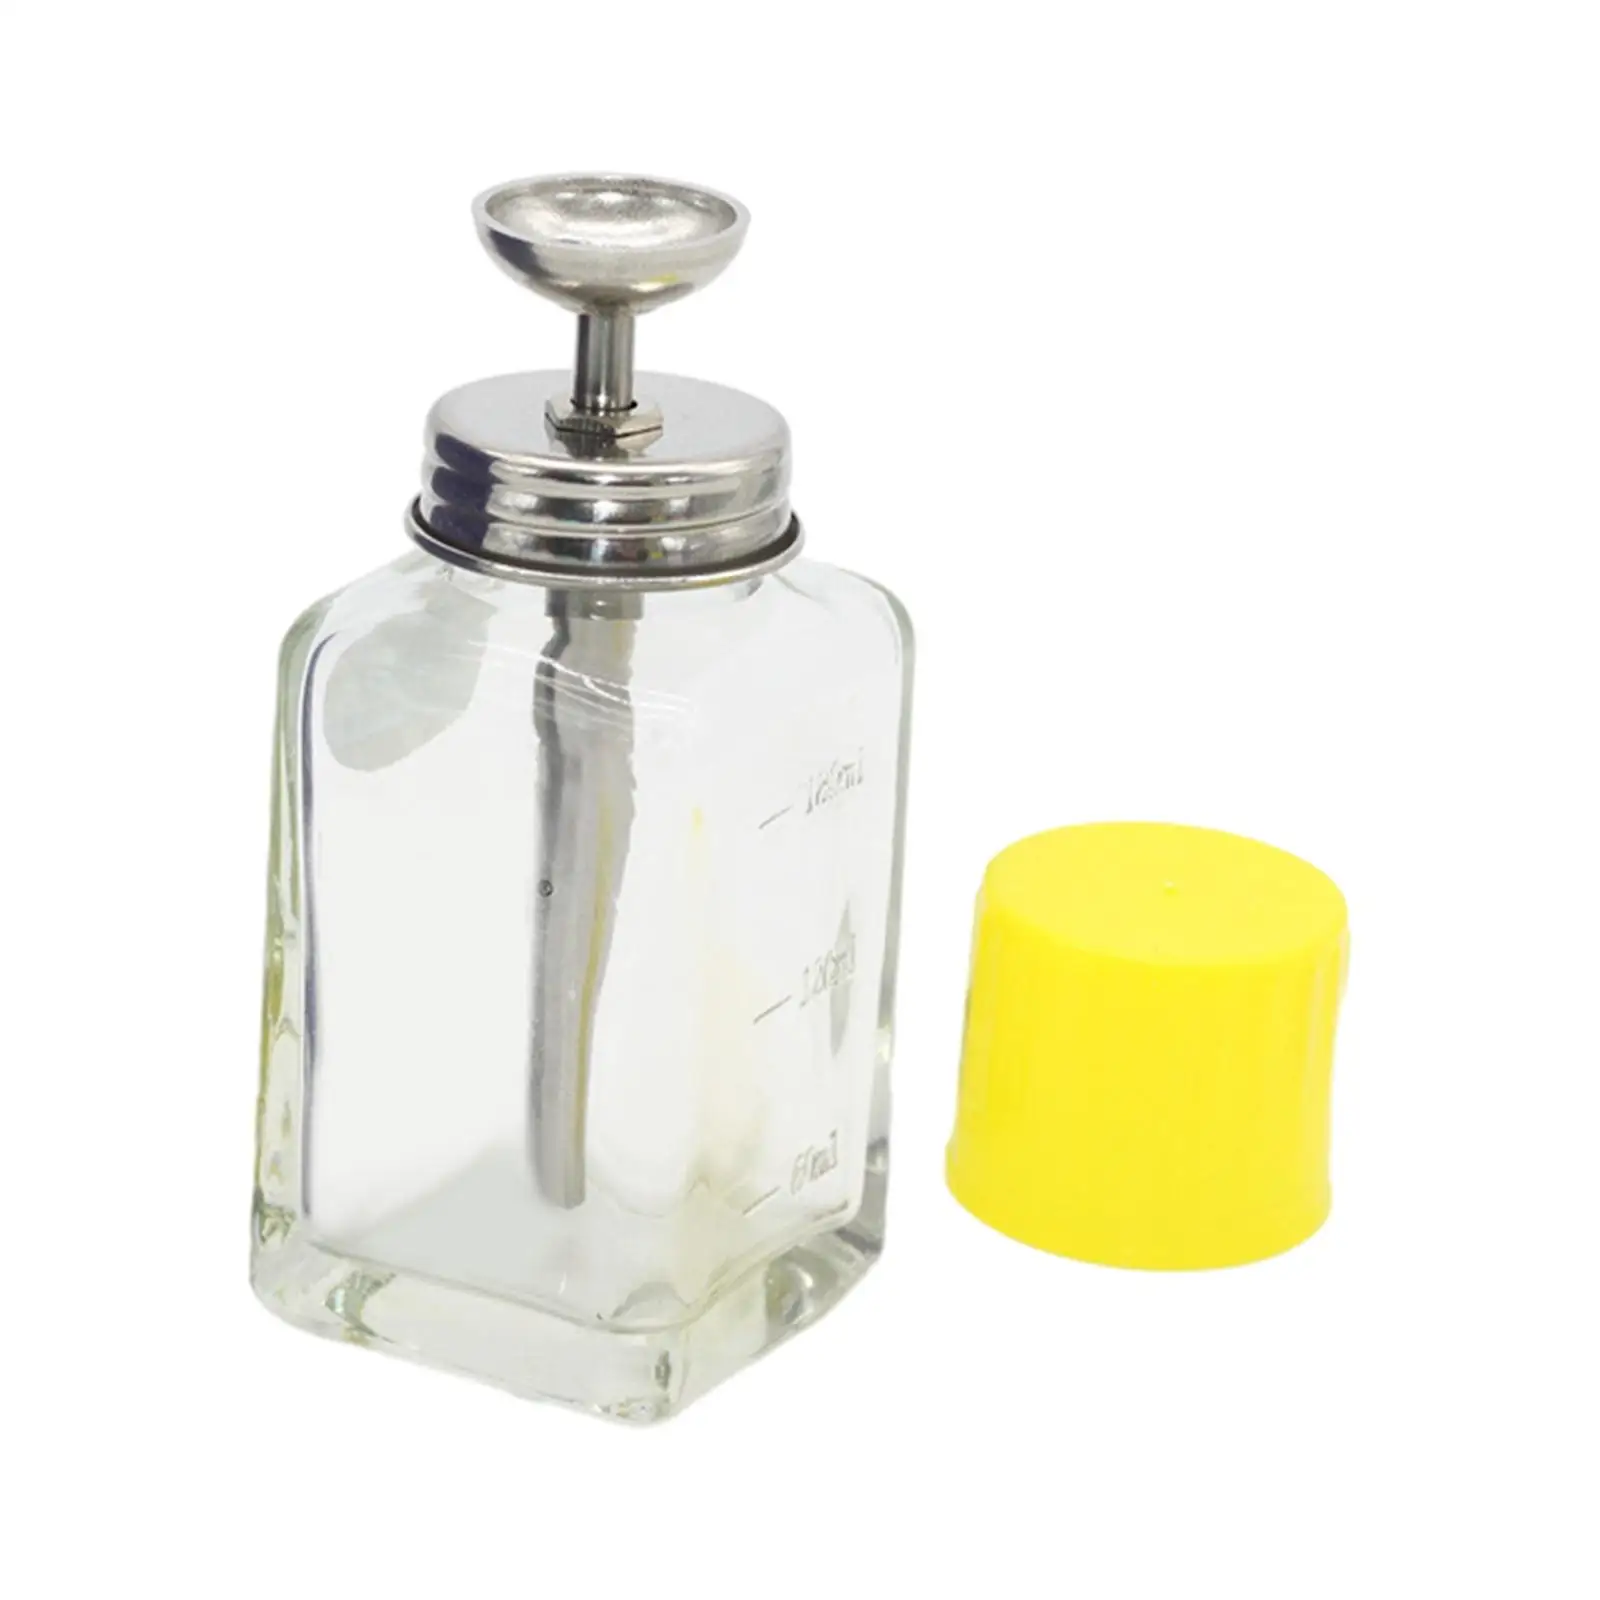 Empty Refillable Bottle with Scale Press Type Liquid Pump Dispenser for Home